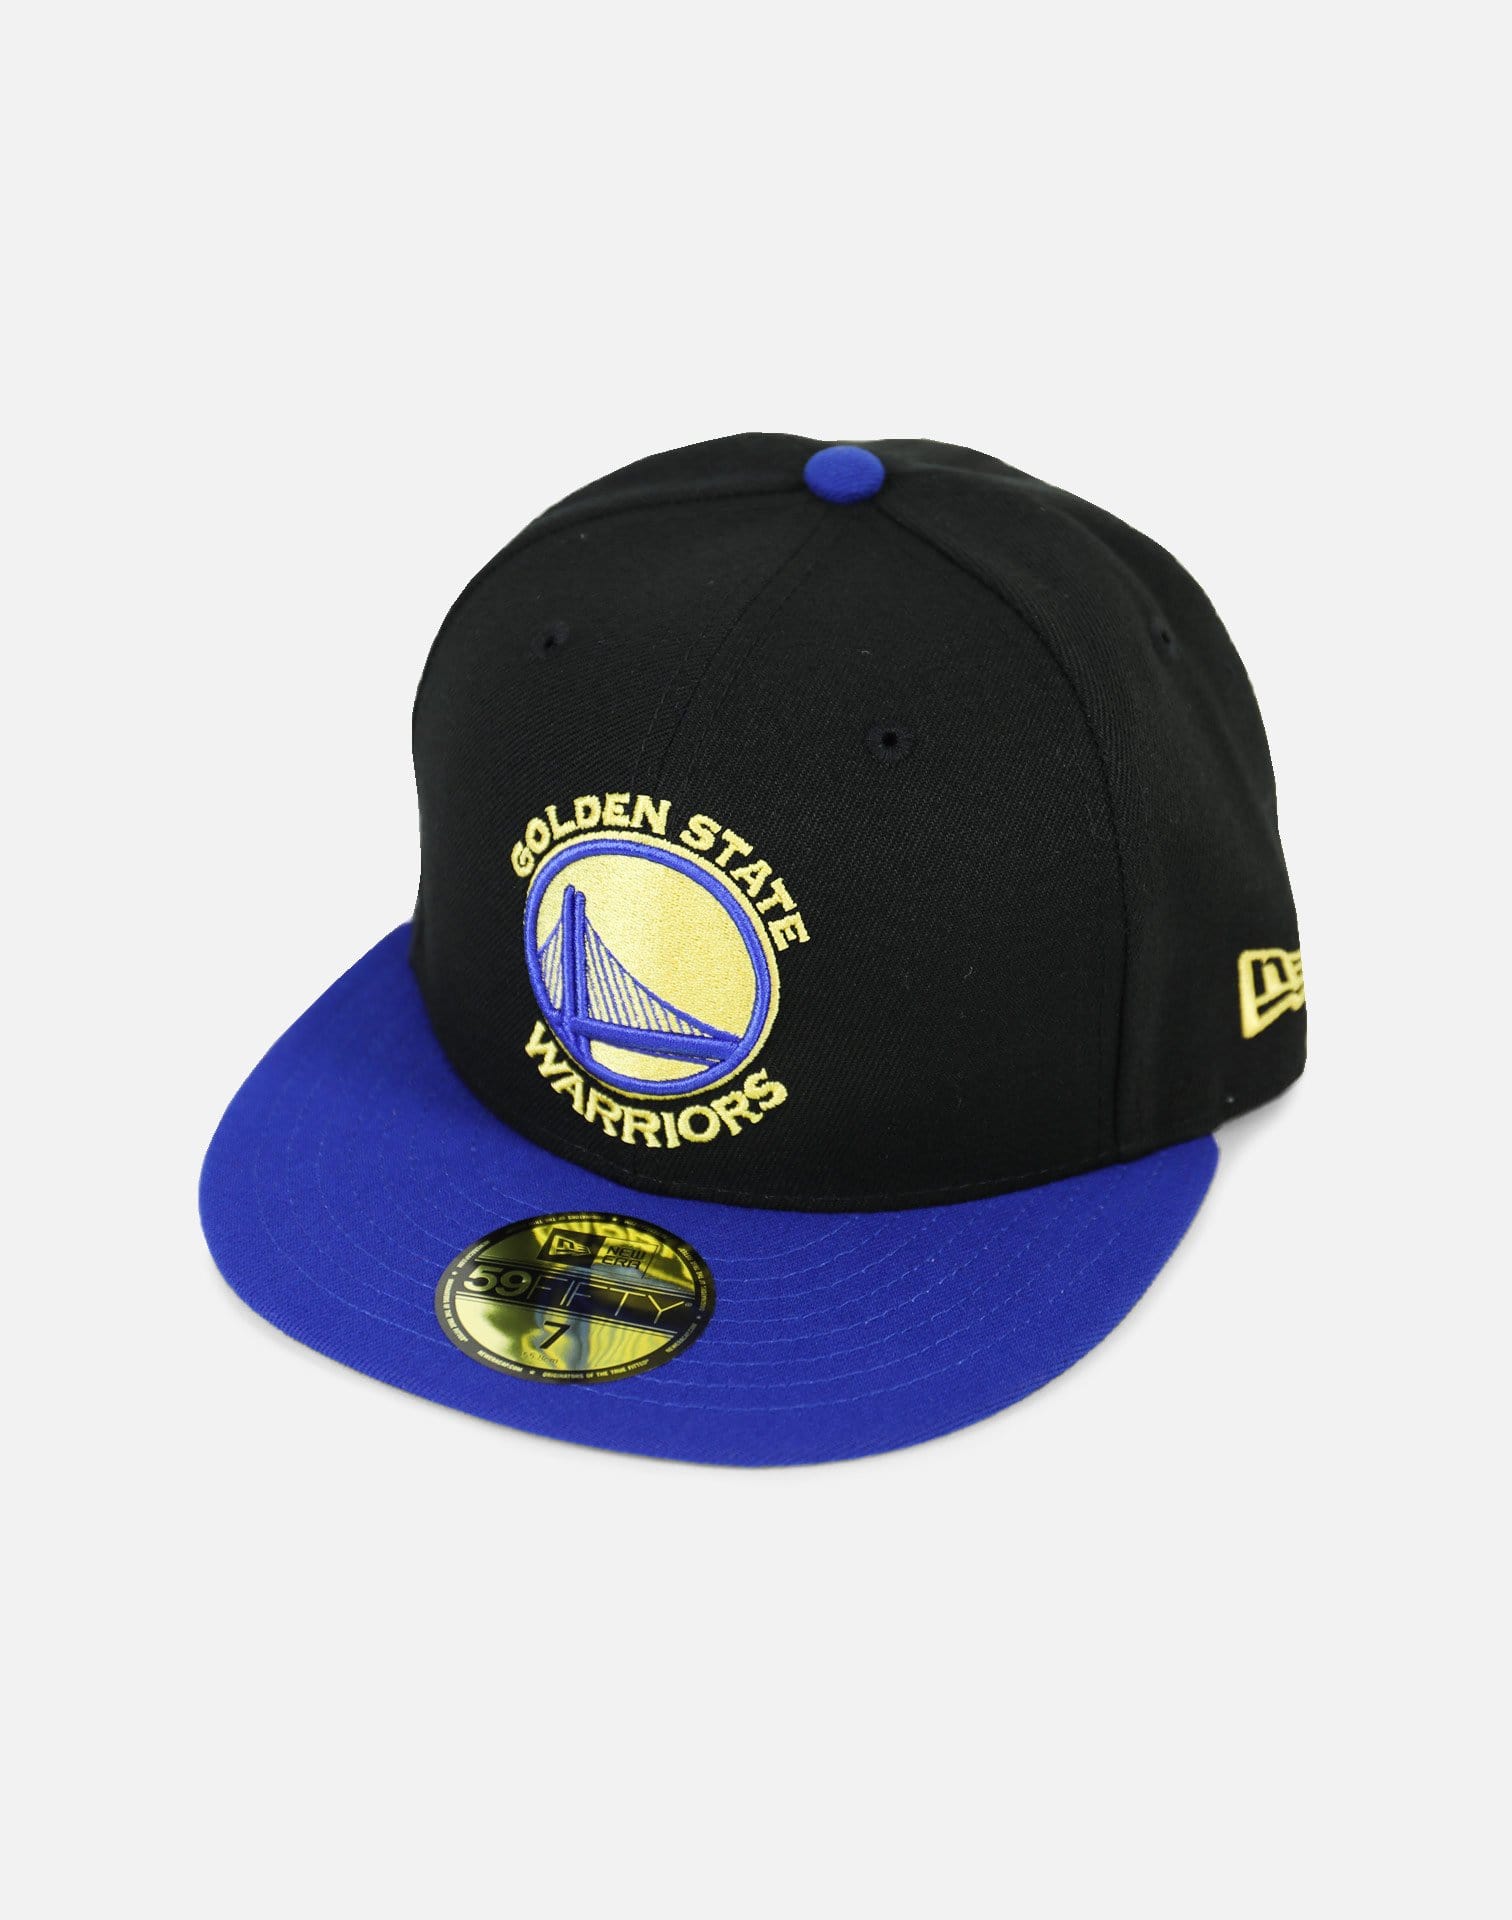 New Era Golden State Warriors Authentic Fitted Hat (Black/Blue)